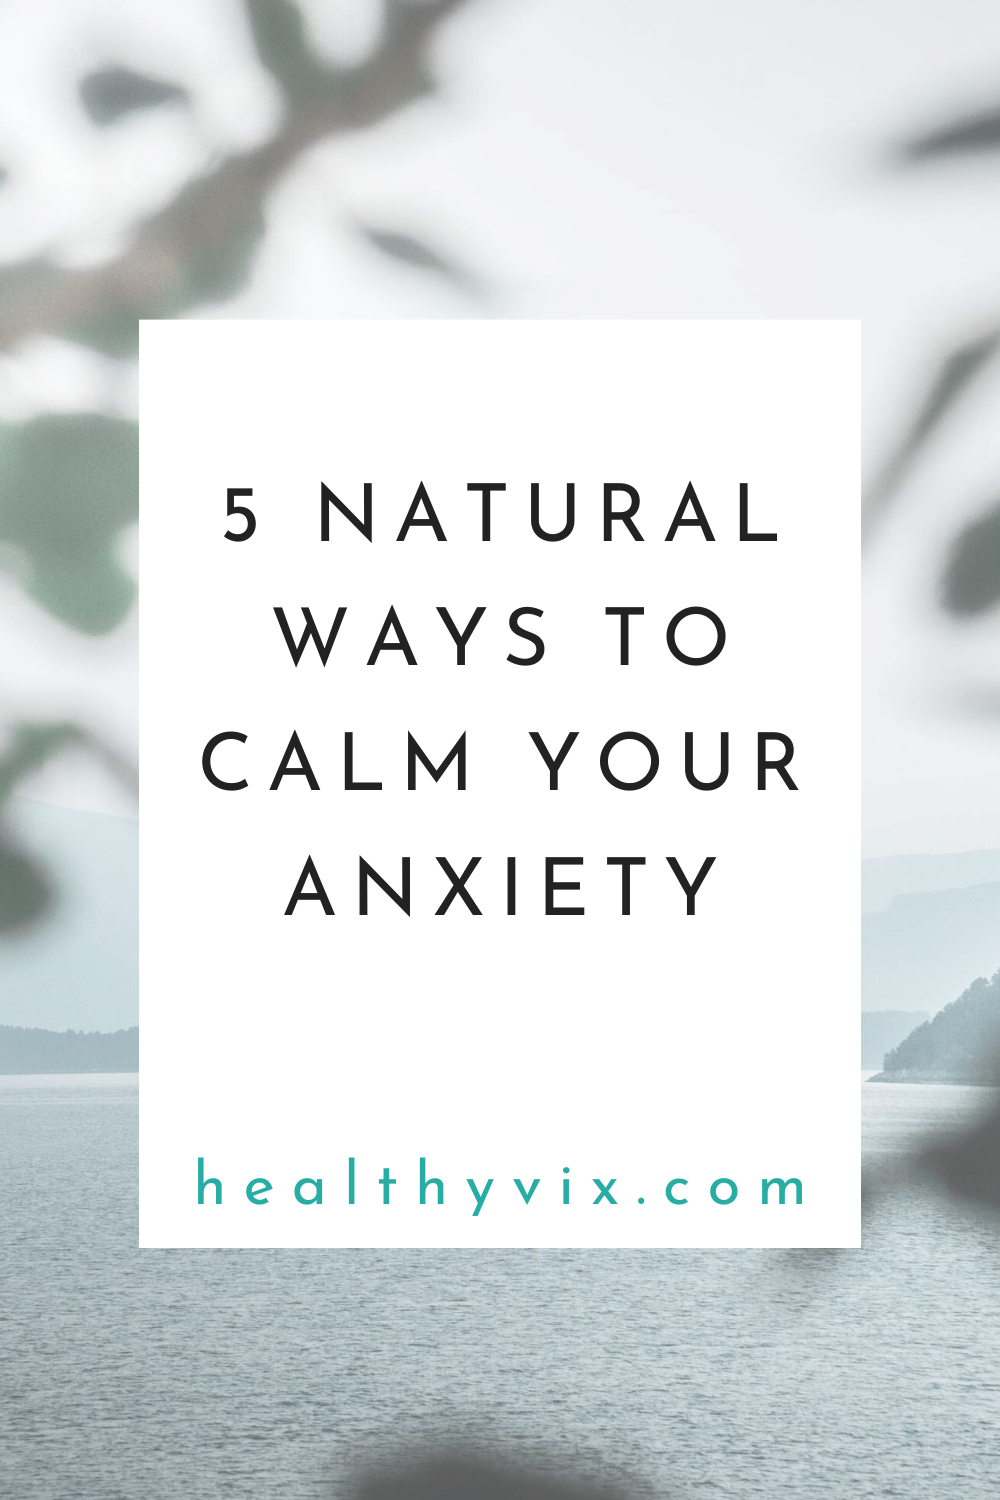 5 natural ways to calm your anxiety